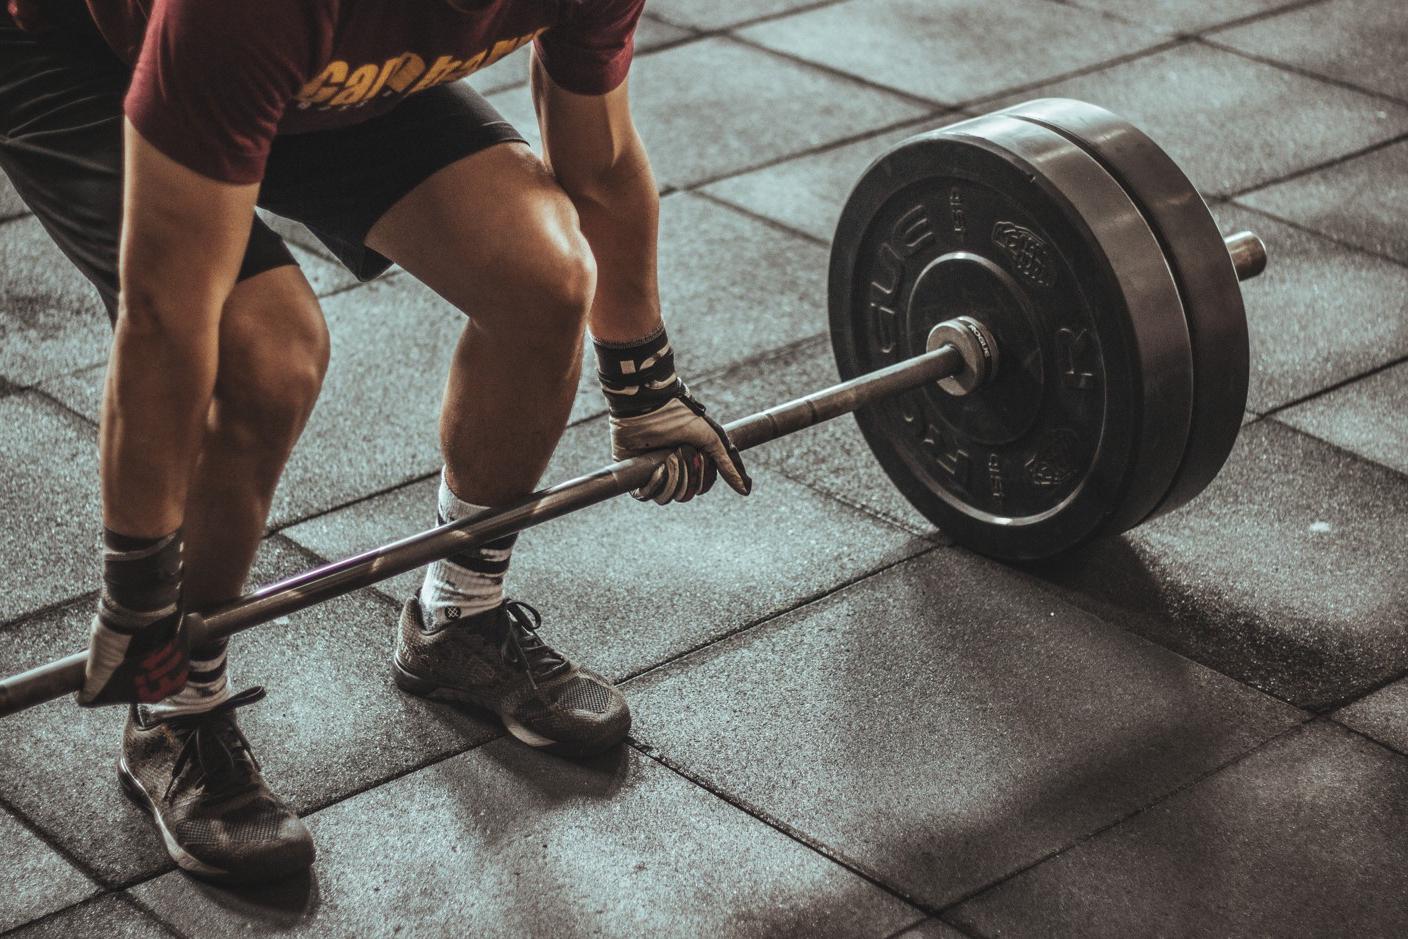 The mixed grip is considered the most comfortable when performing deadlifts.